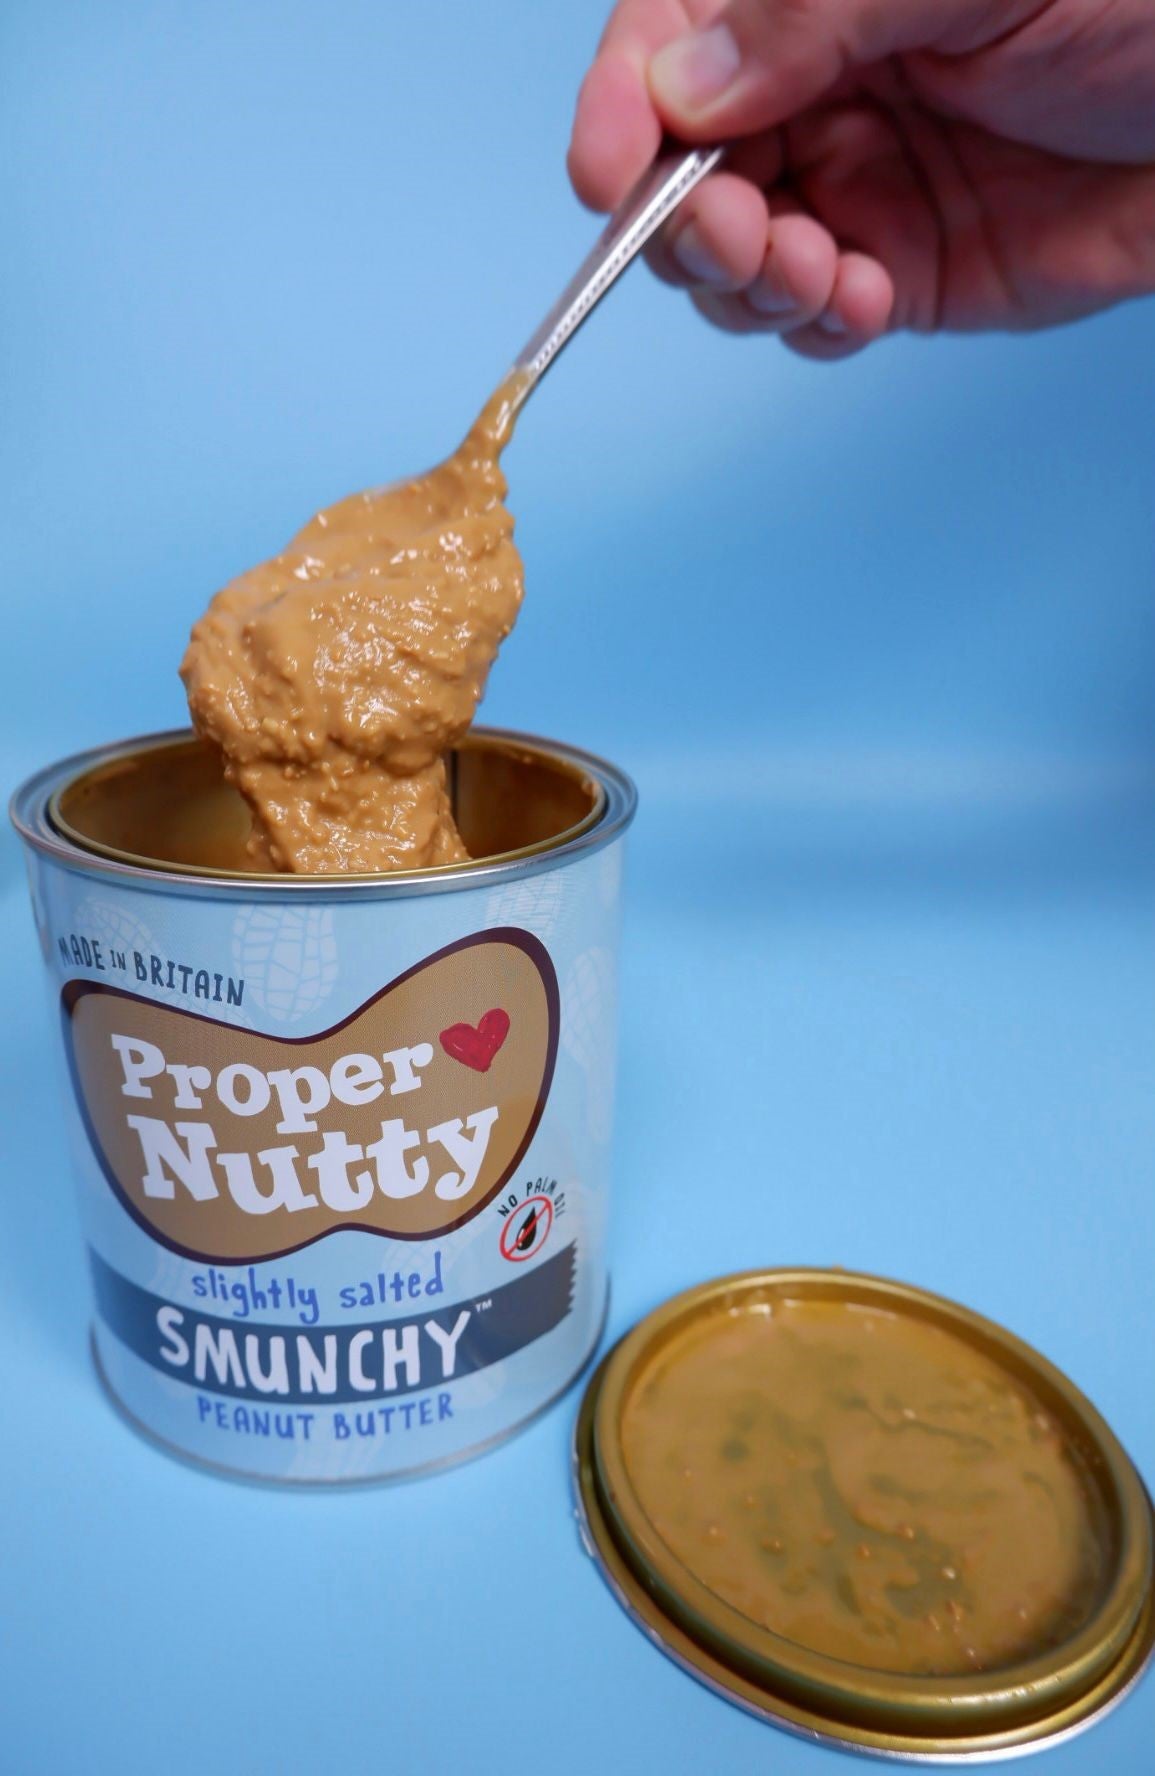 10 Reasons Why Peanut Butter is Your New Best Friend for a Healthier Lifestyle